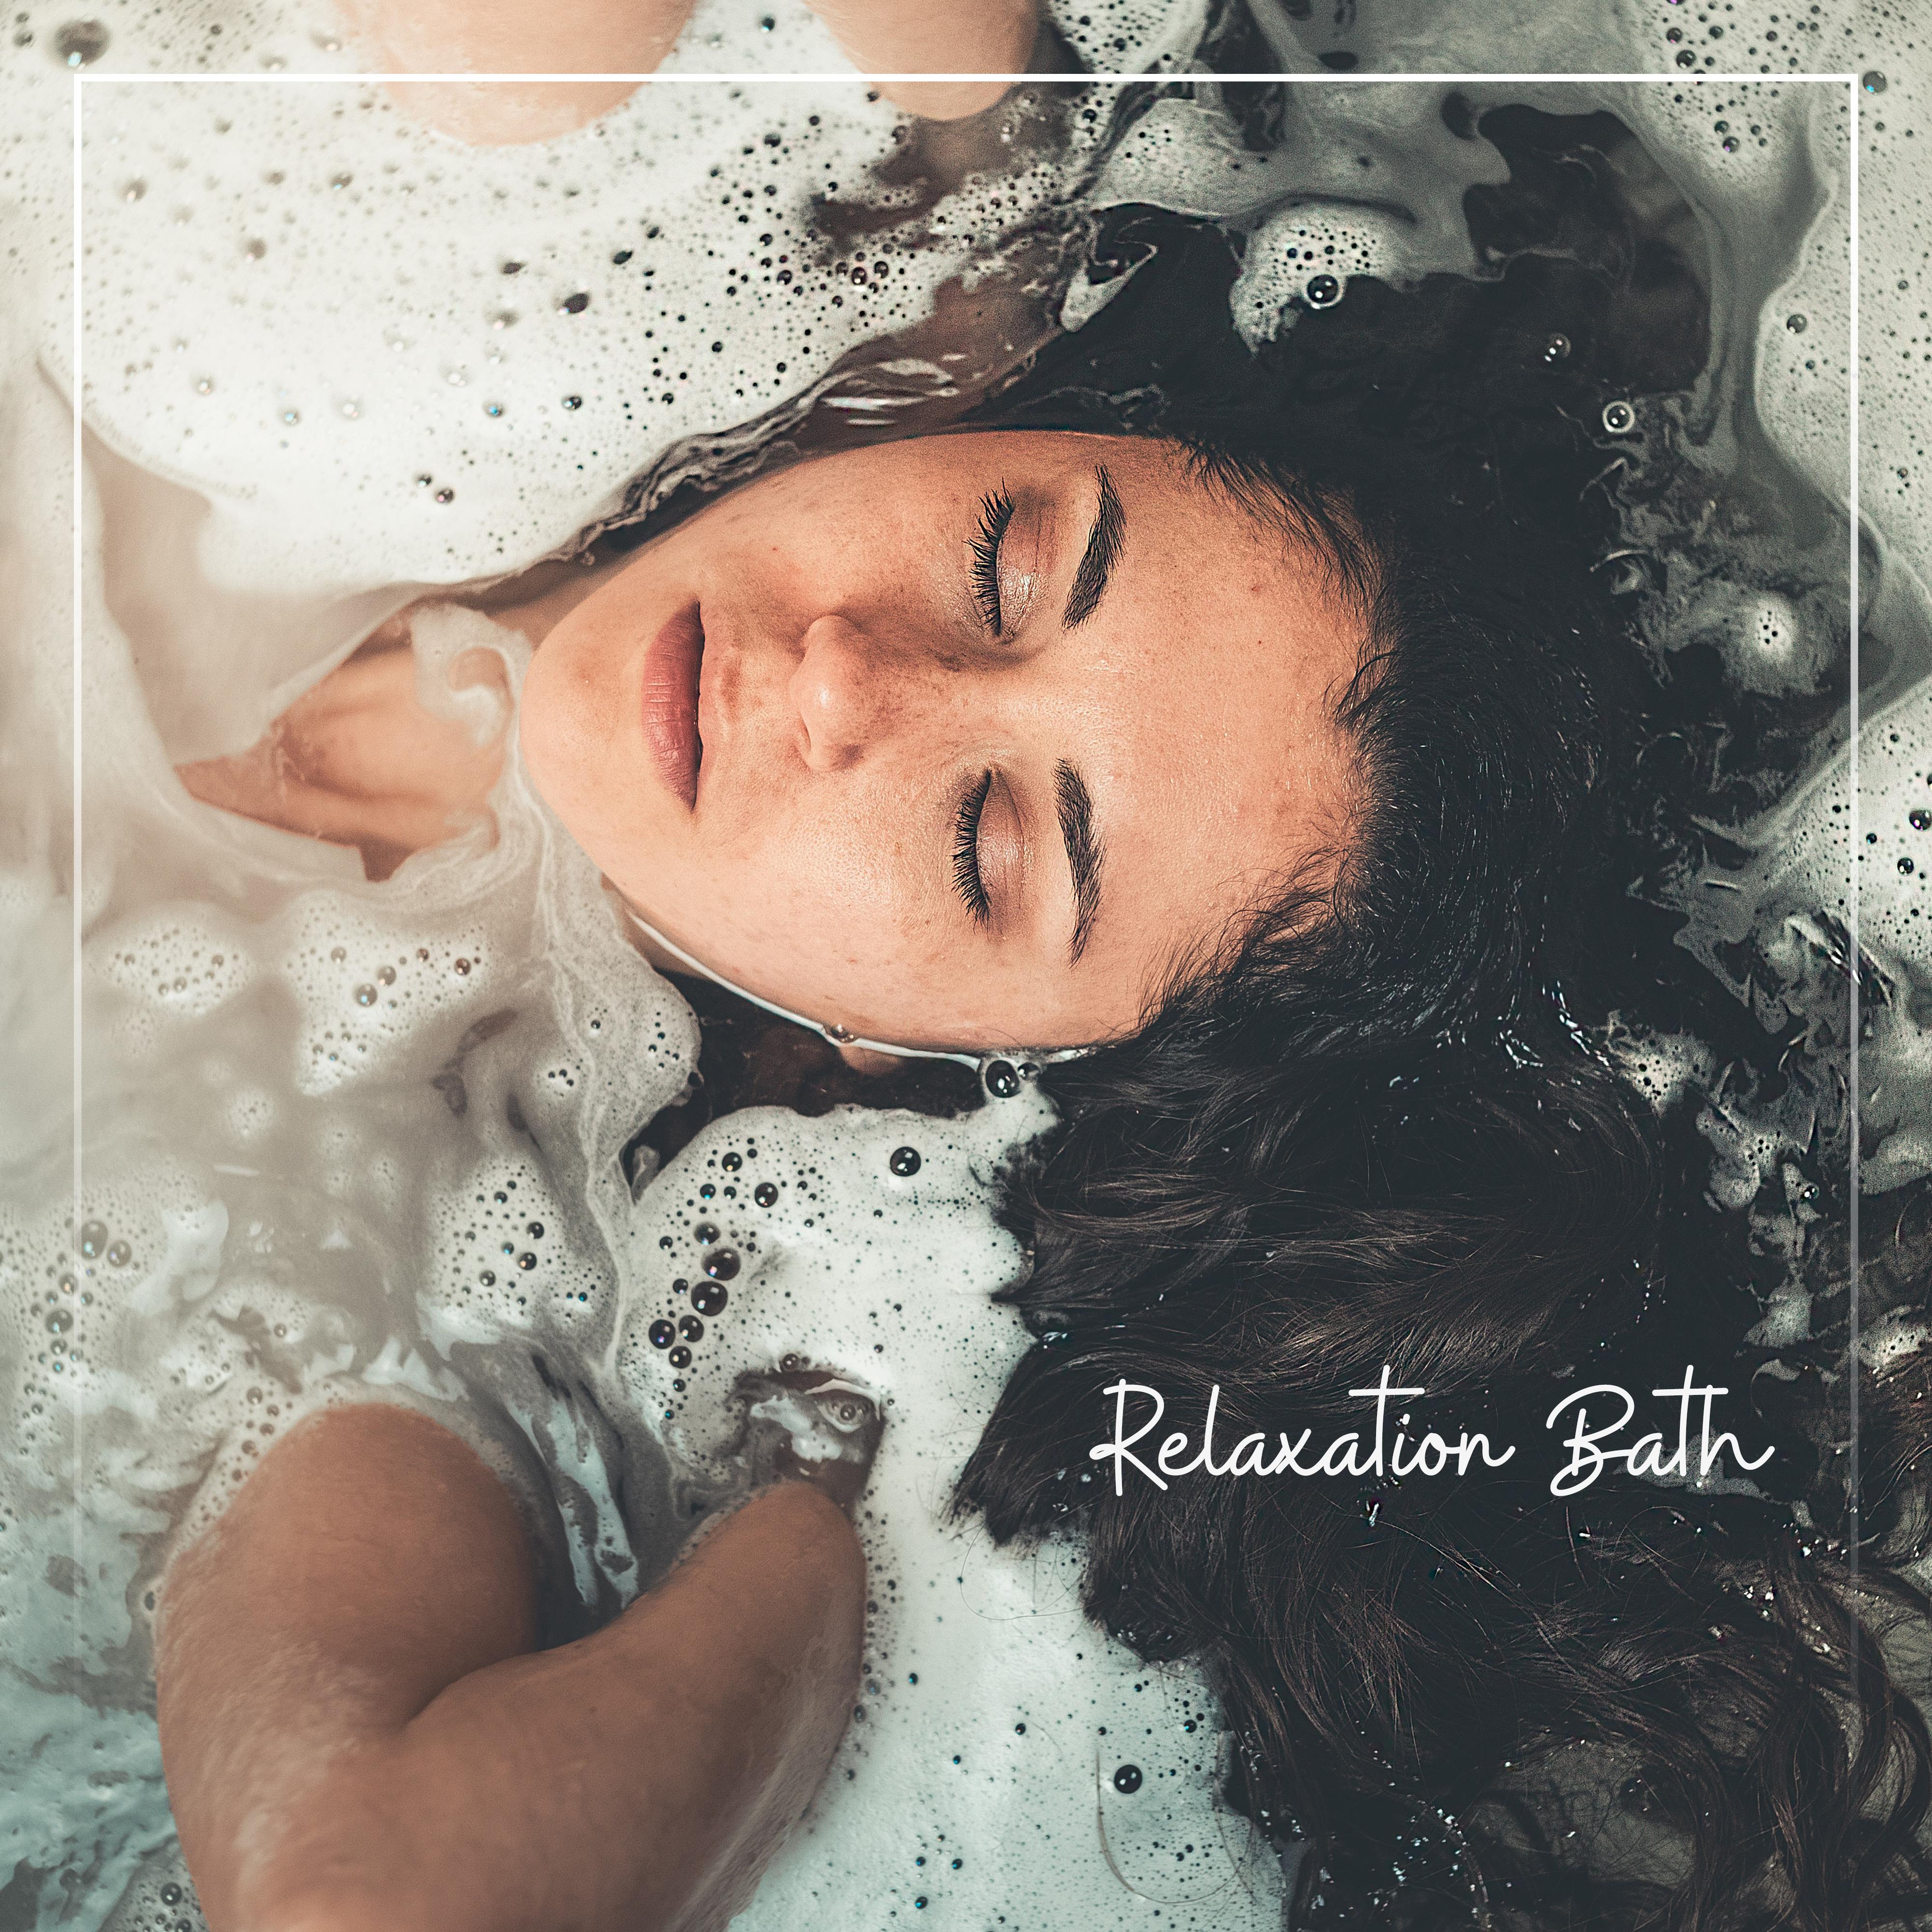 Relaxation Bath: Extremely Relaxing Music with Ocean Sounds Created for a Deeply Relaxing Bath and a Moment of Pleasure Just for Yourself